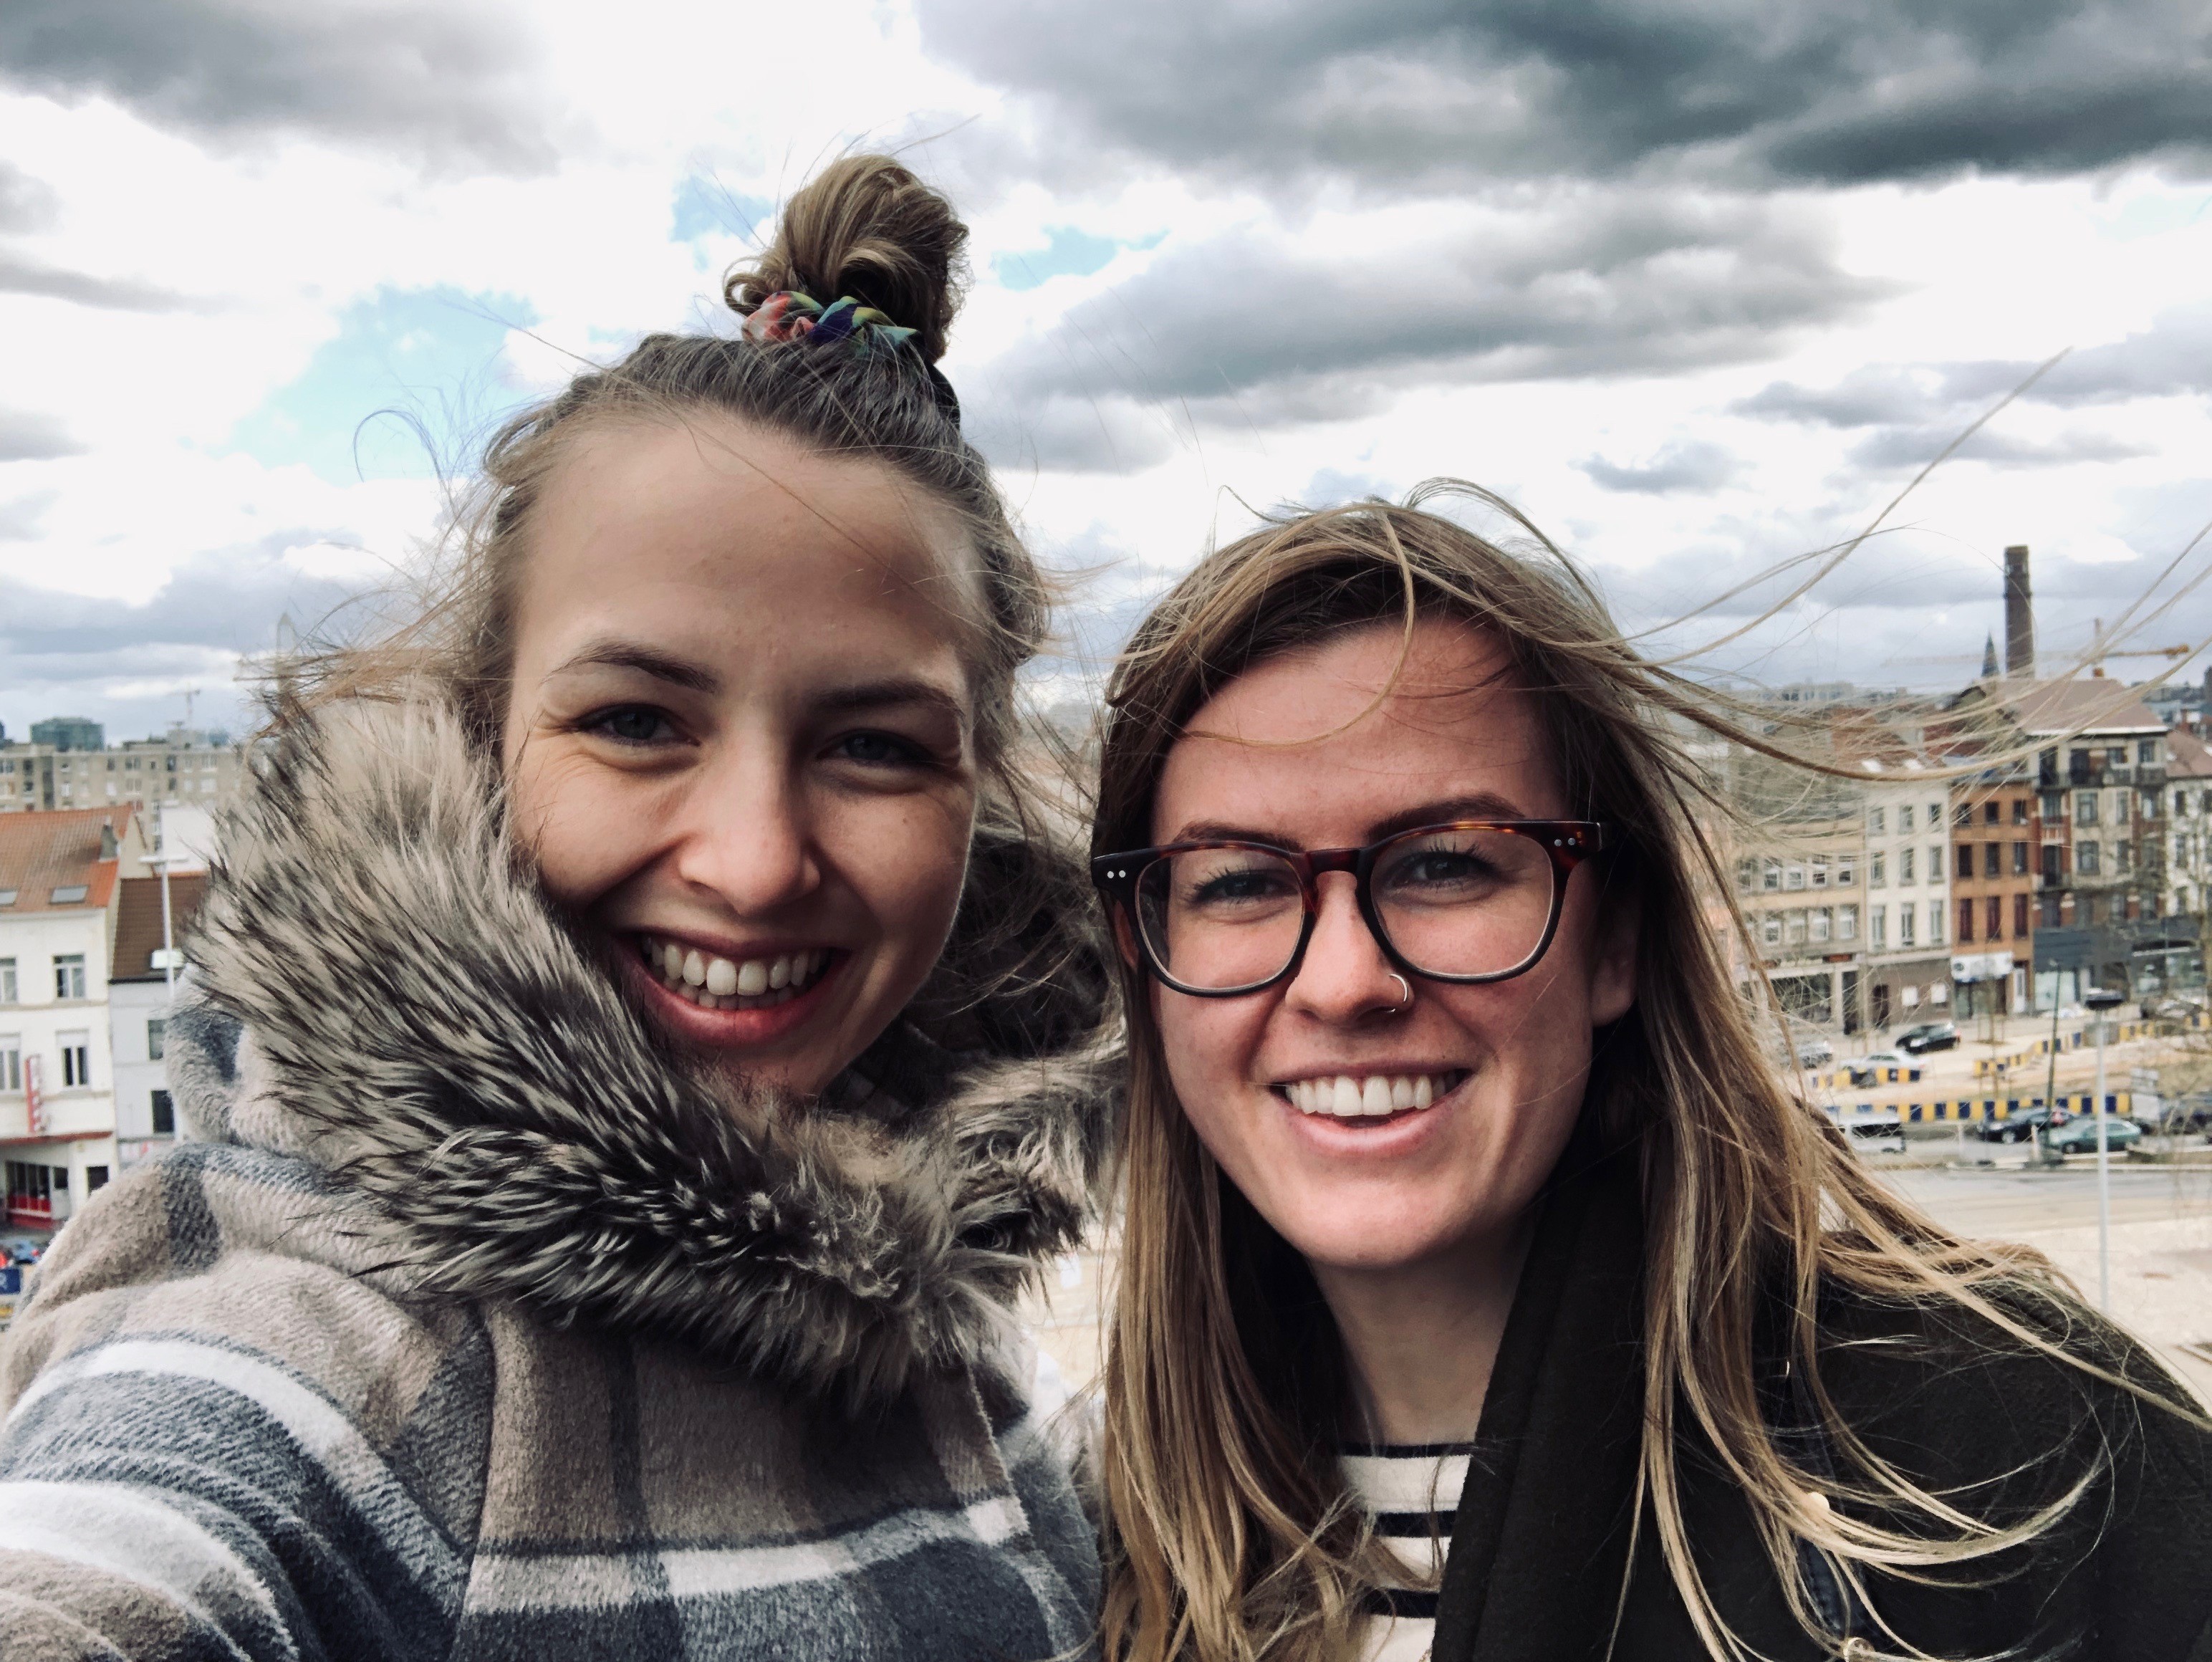 Second year medical students Hope Fast and Cadence MacPherson travelled to Belgium in March to present their dean's summer research project at the Third International Conference on End of Life Law, Ethics, Policy, and Practice. 